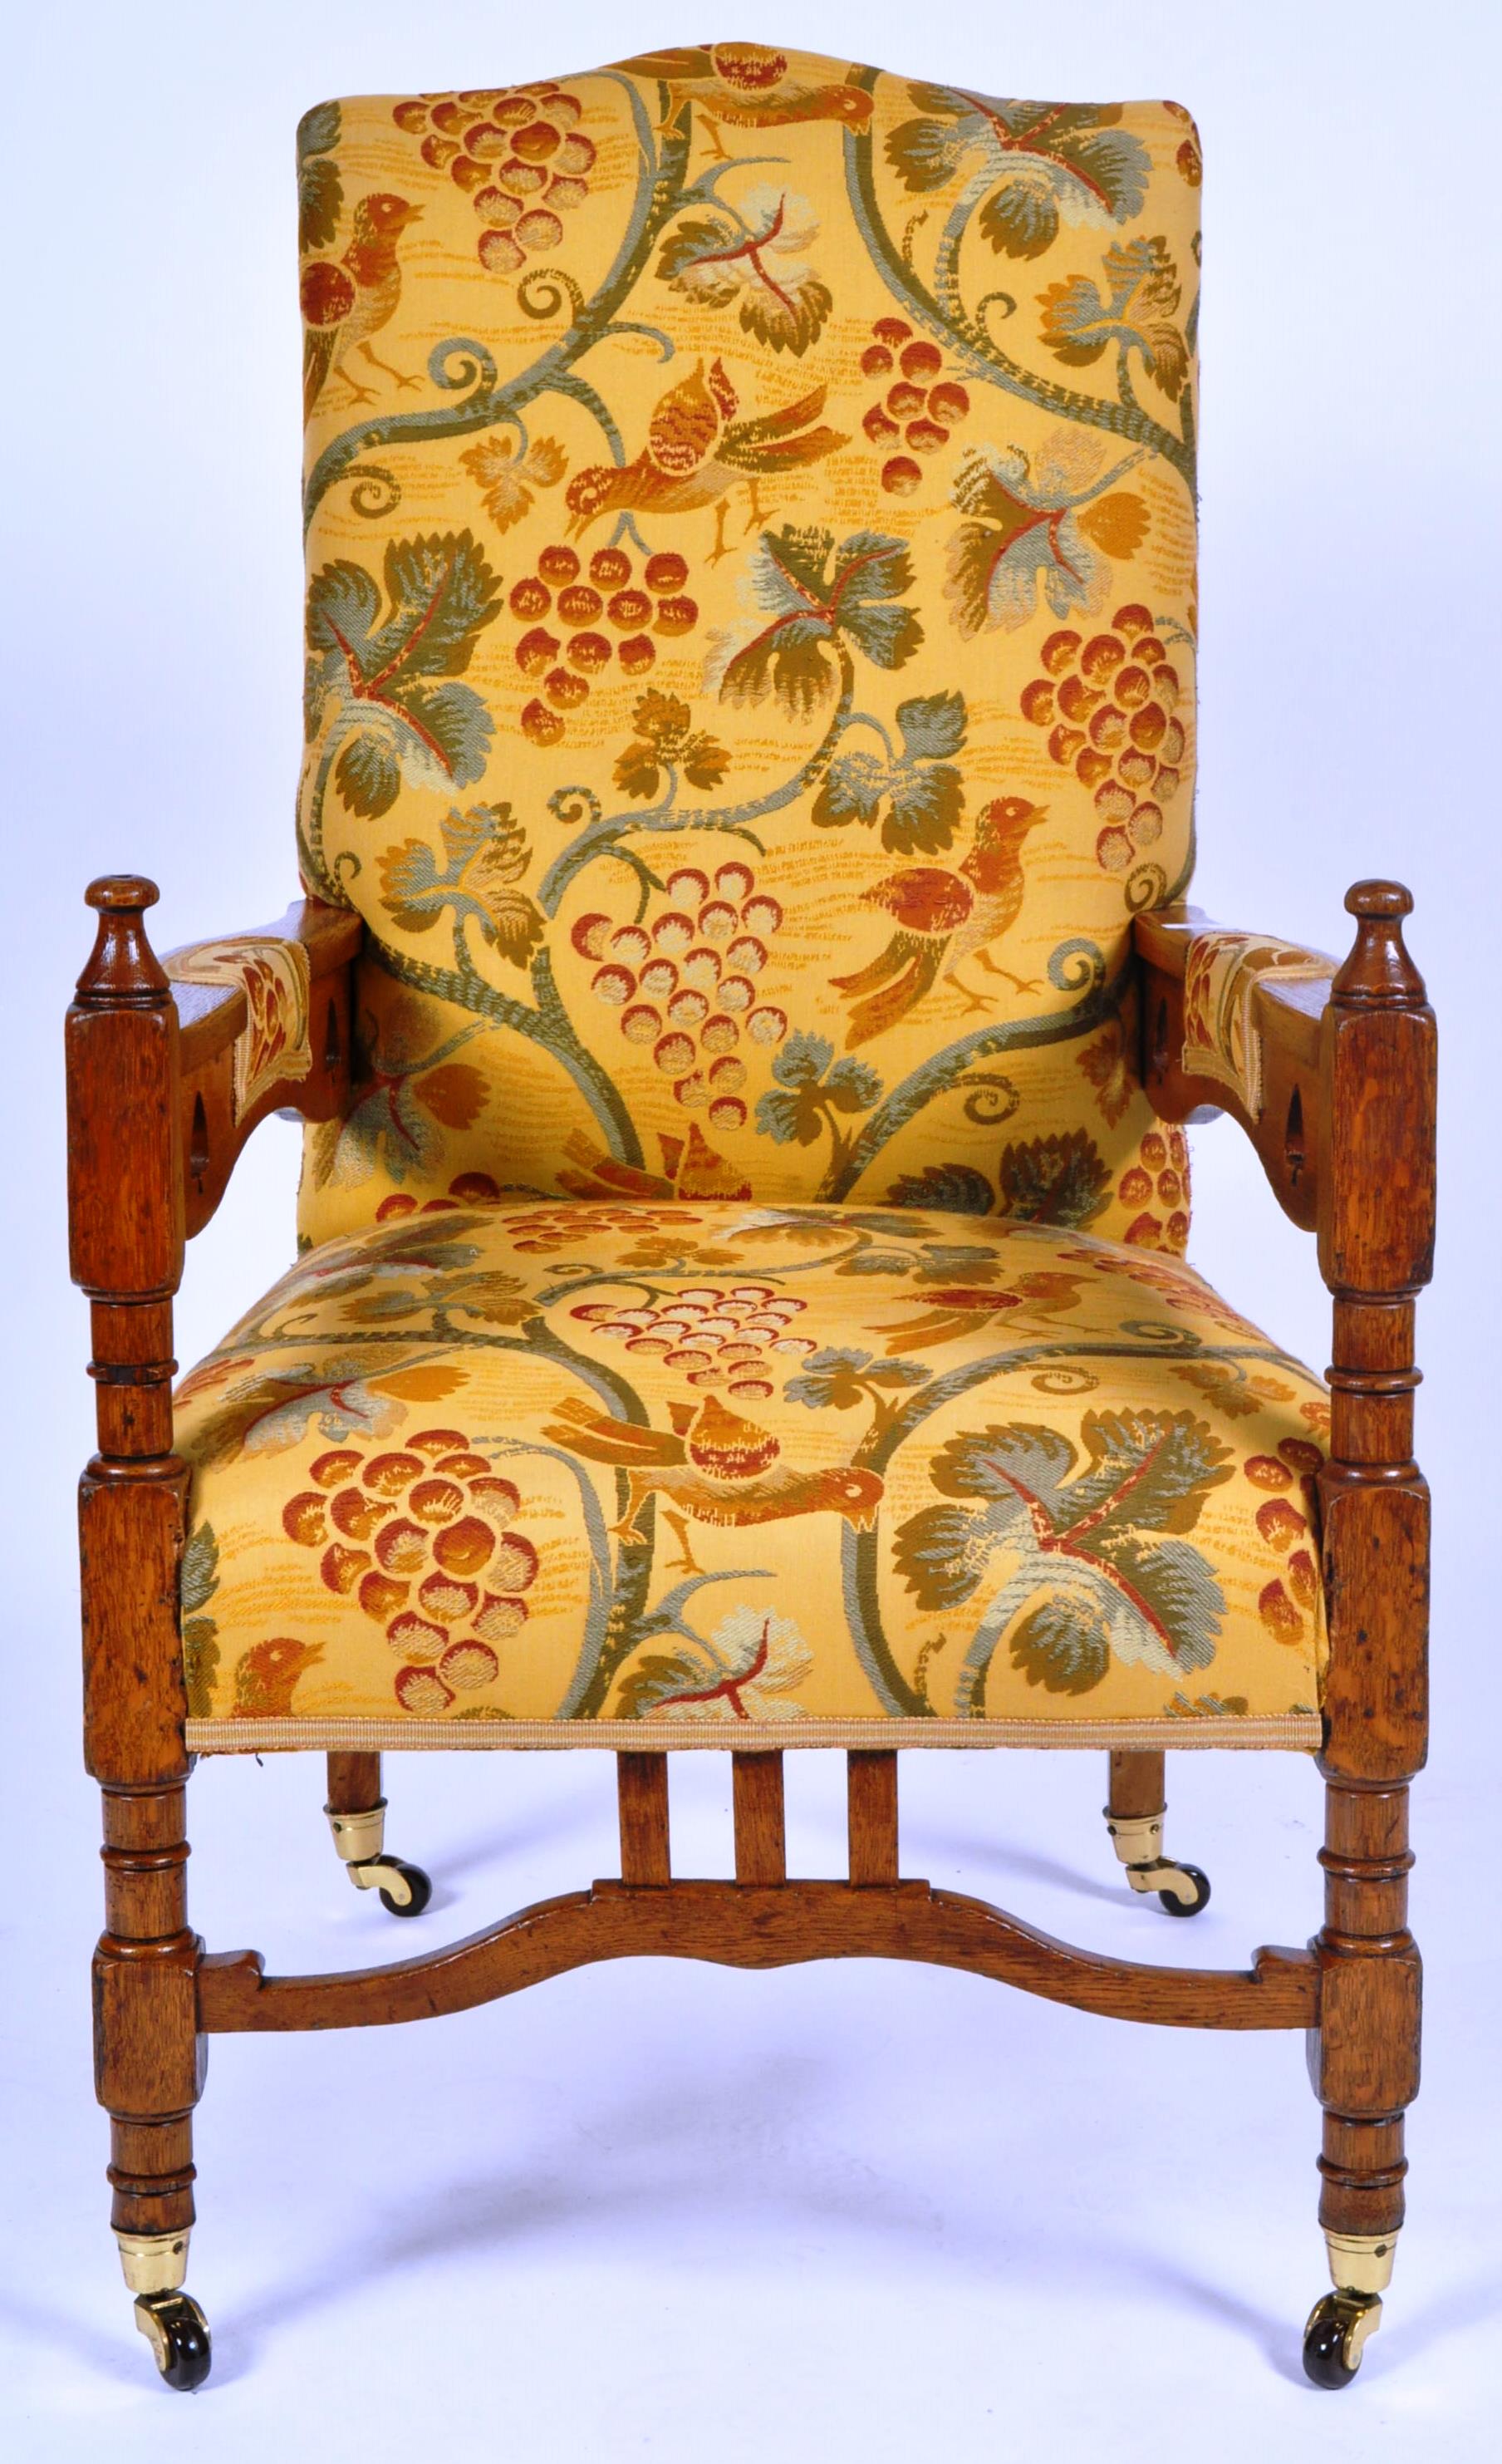 20TH CENTURY ARTS & CRAFTS ARMCHAIR IN THE MANNER OF SHAPLAND & PETTER - Image 5 of 8